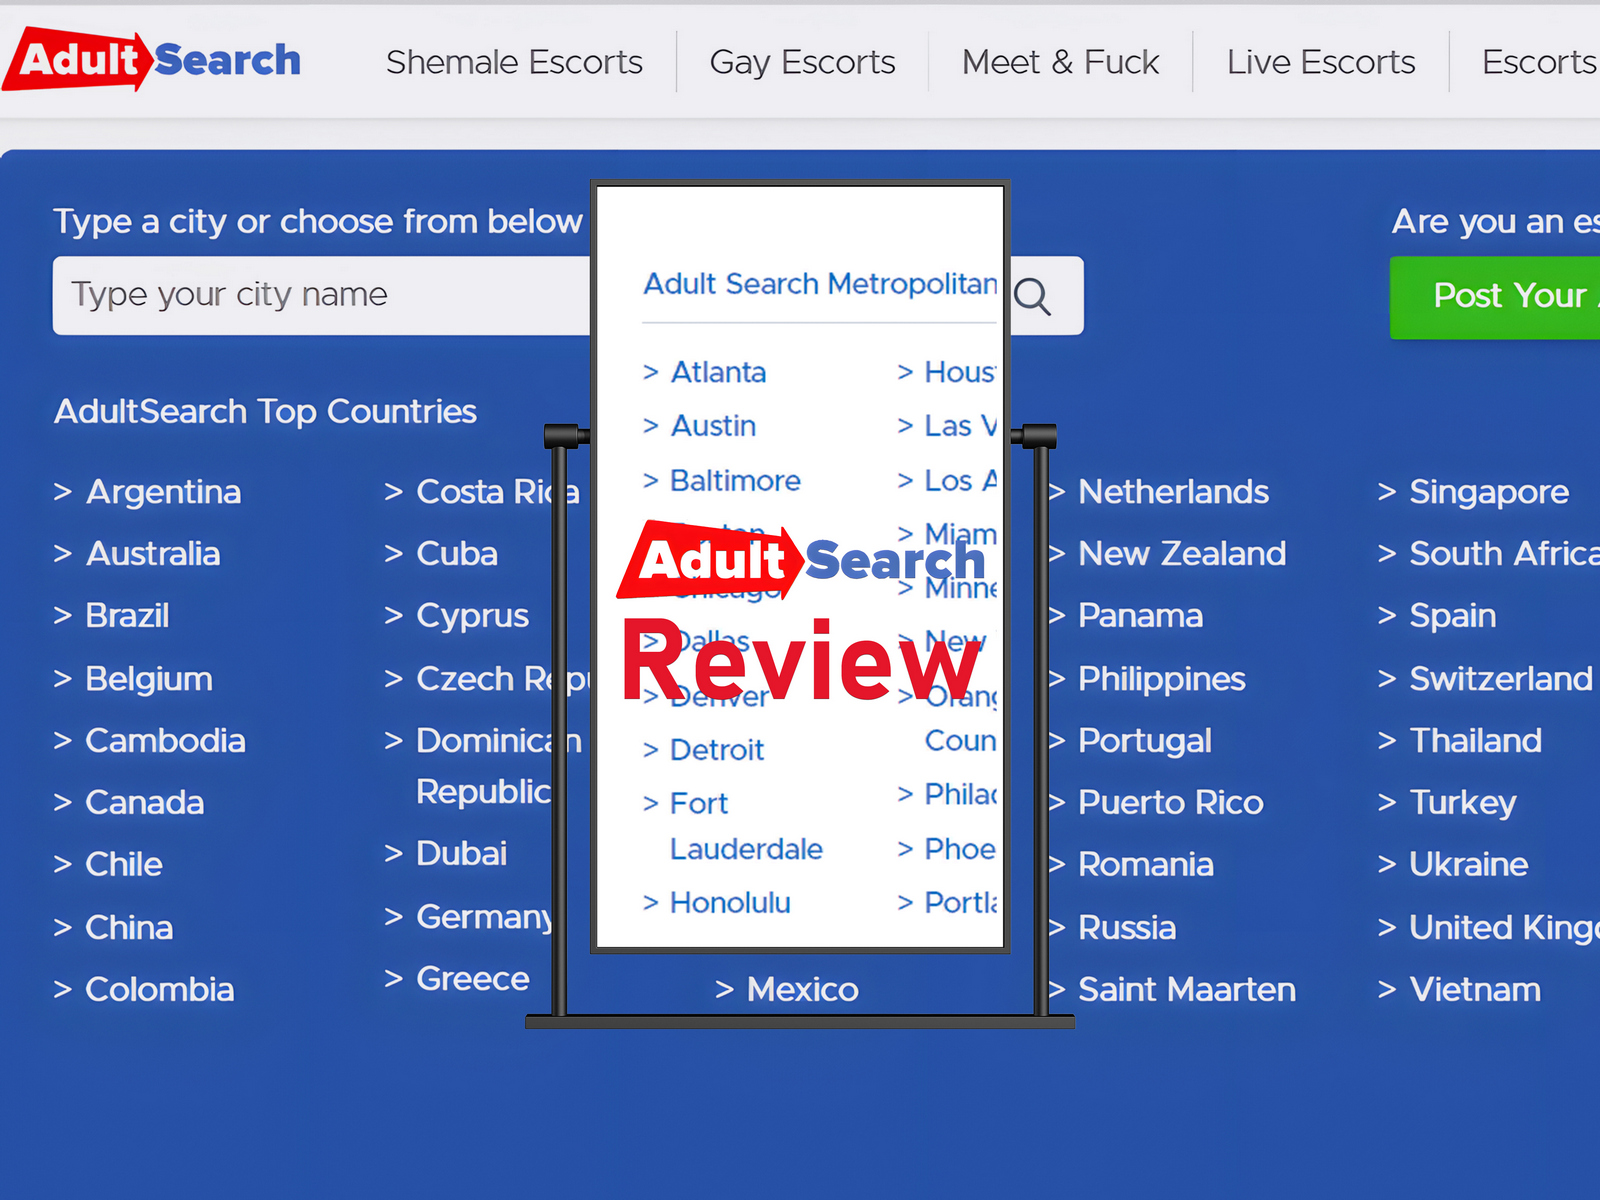 AdultSearch Review